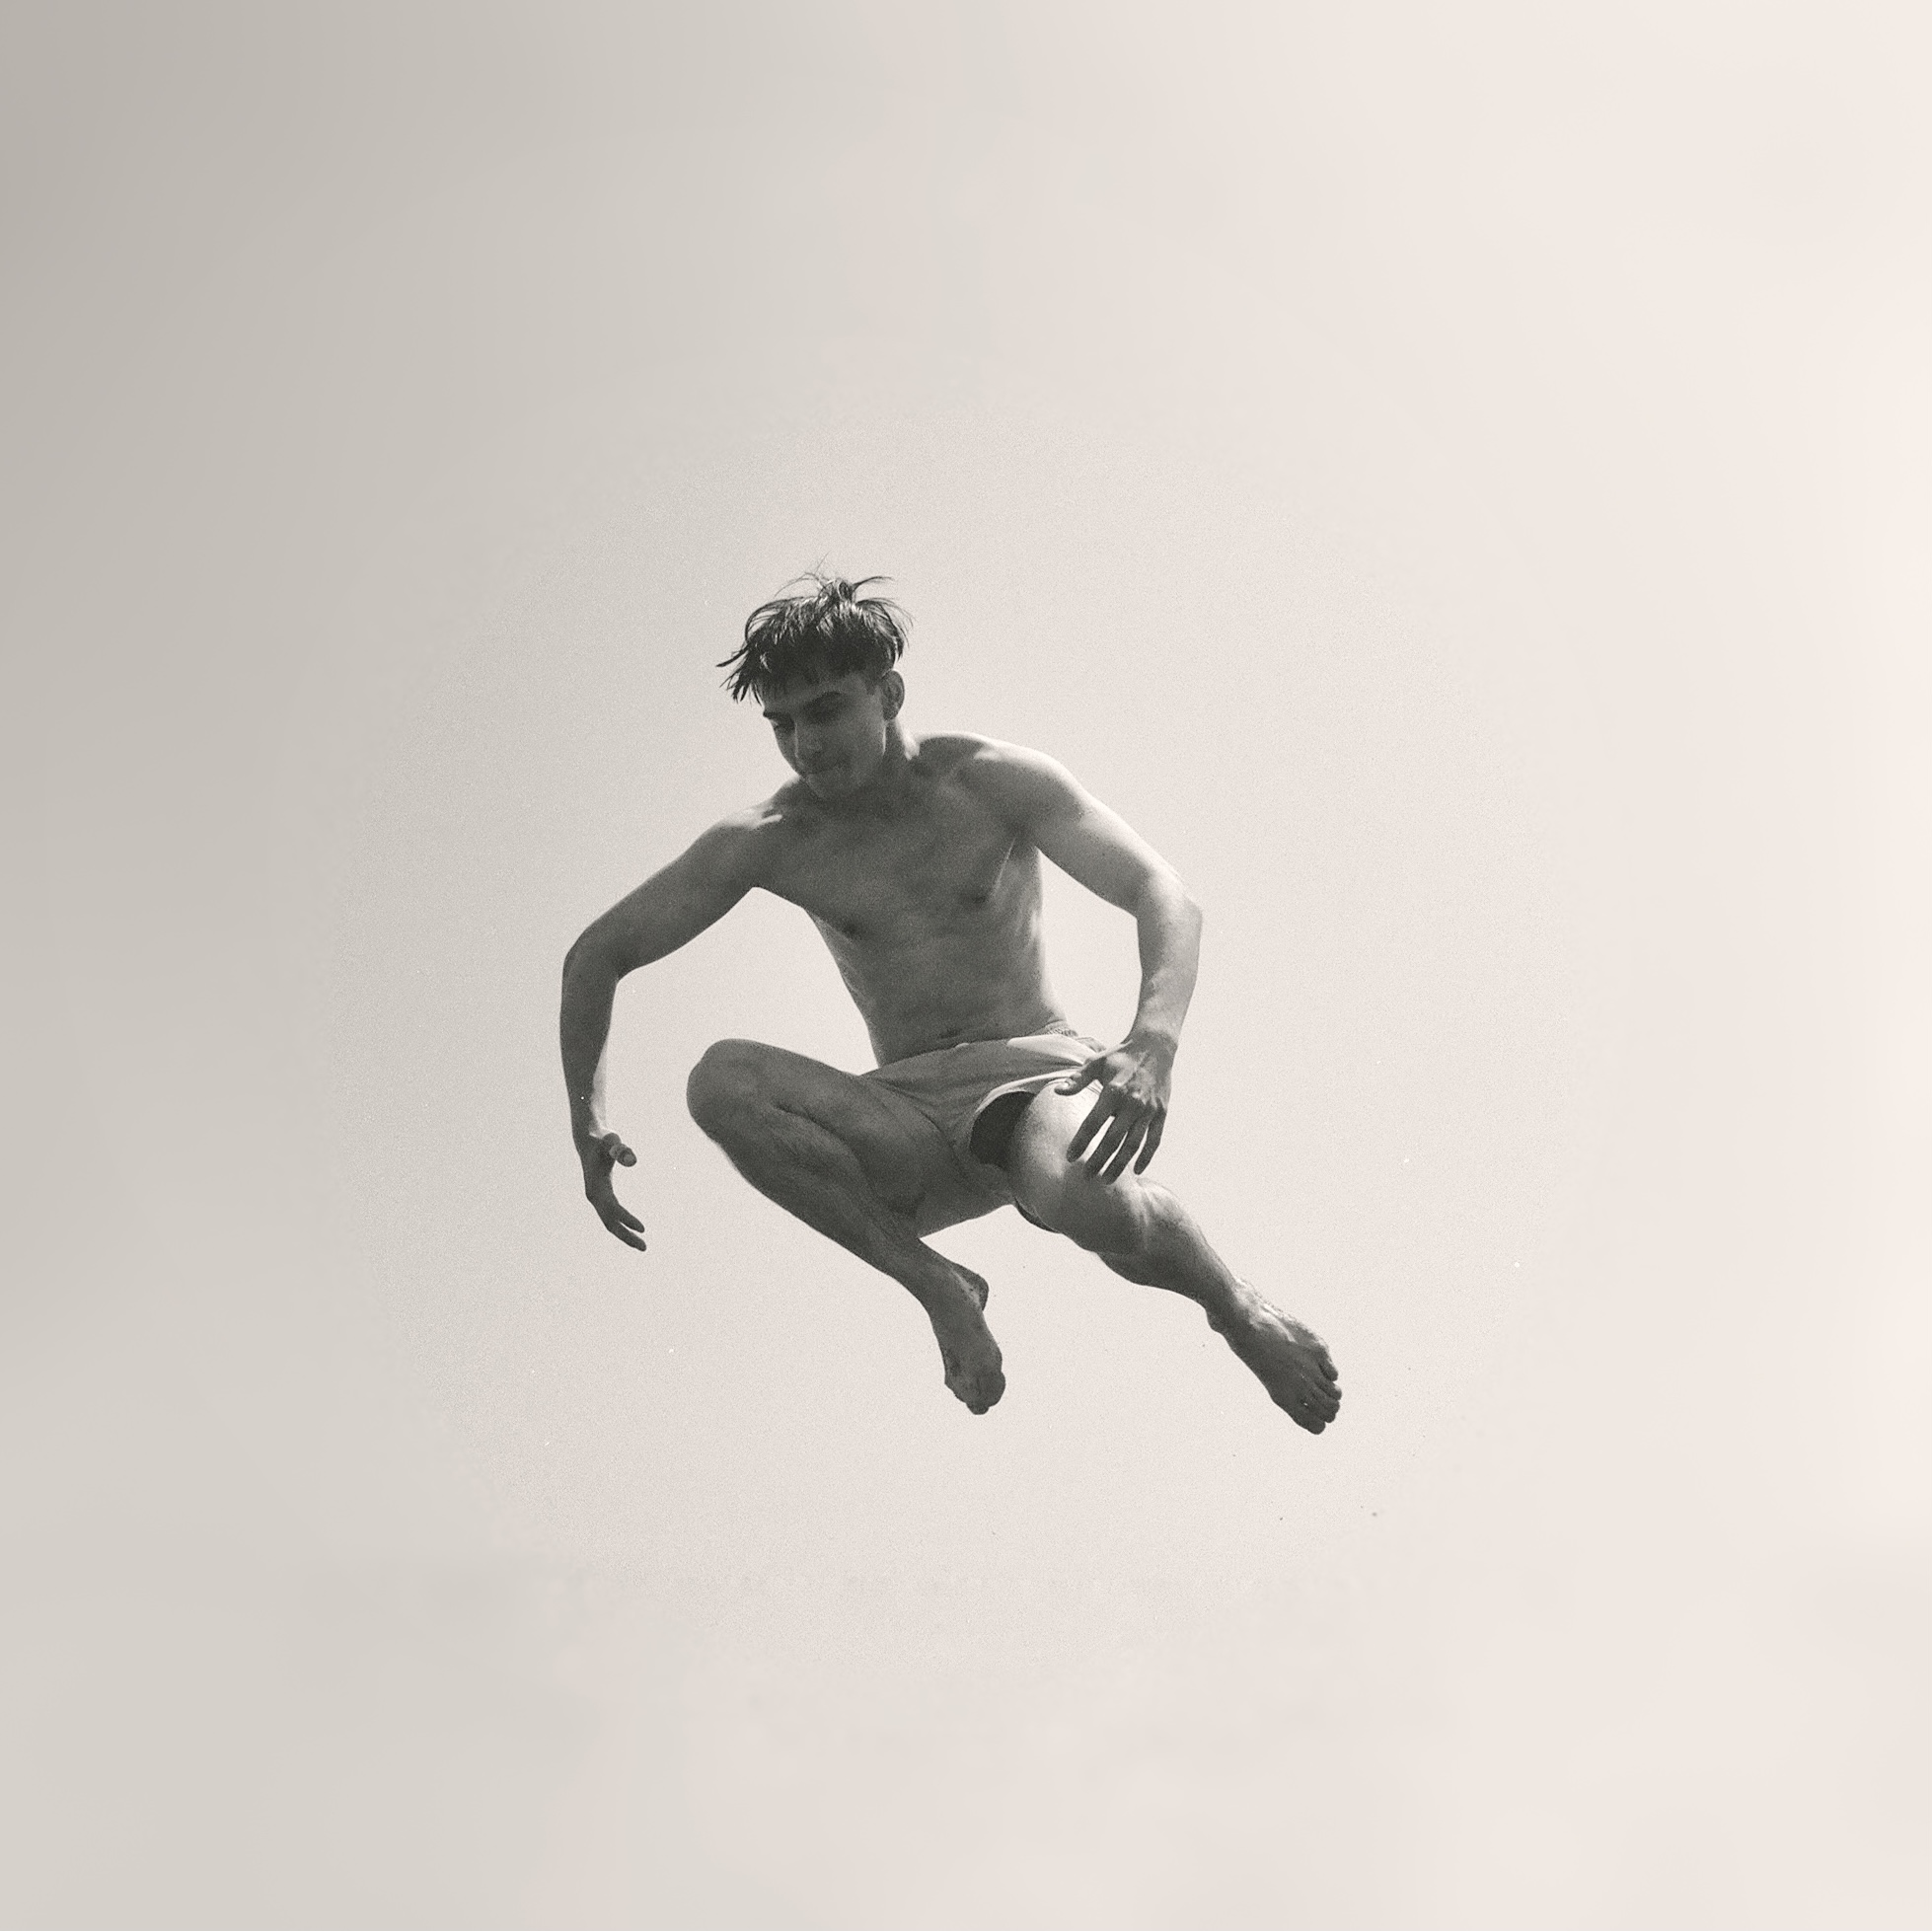 black and white photo of a boy in shorts in mid-air after jumping off a cliff.